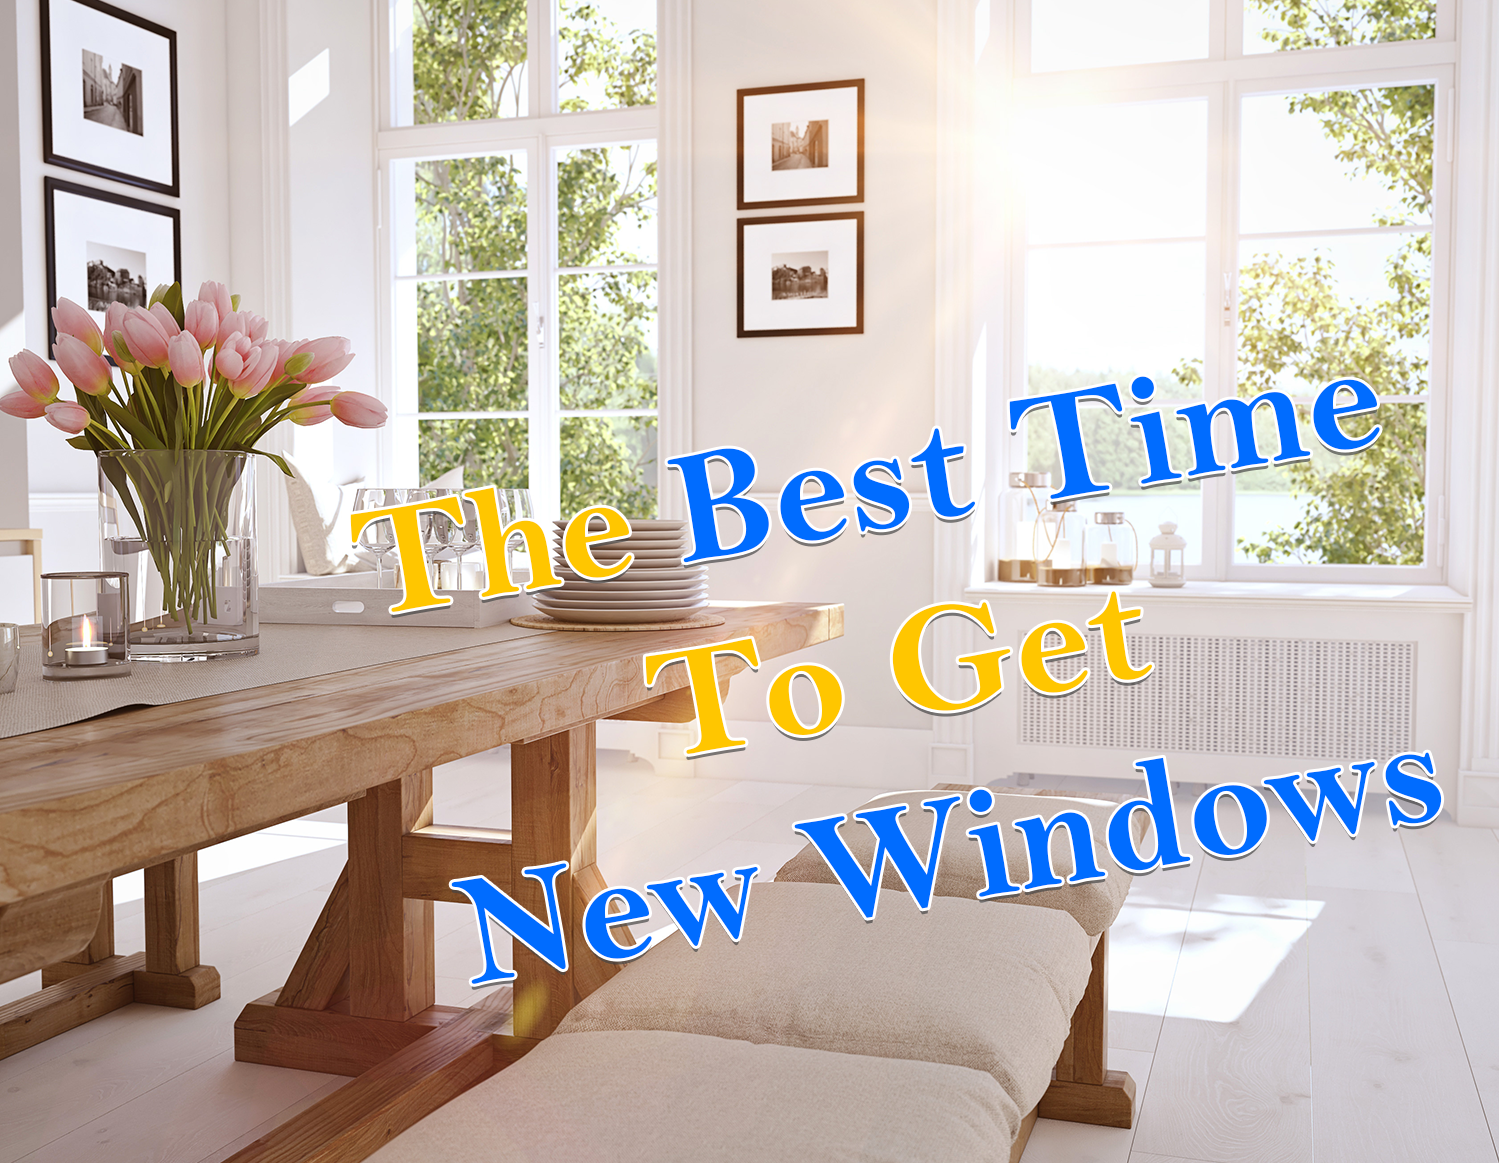 The Best Time to Get New Windows